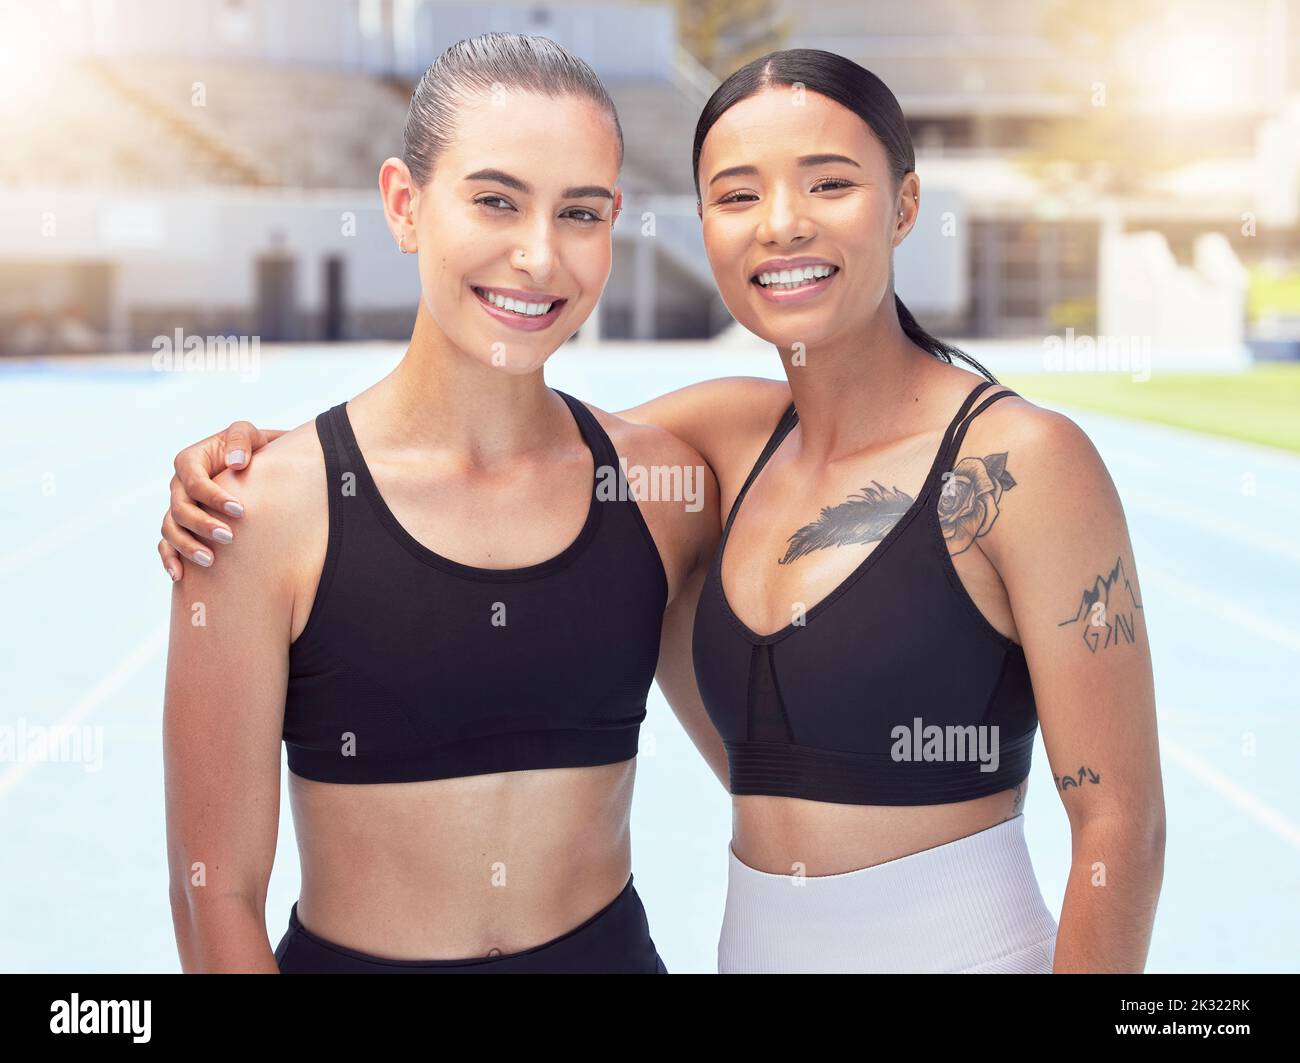 Sports women portrait, track runners and athletes training for exercise, workout and marathon at stadium arena outdoors. Happy, smile and healthy Stock Photo